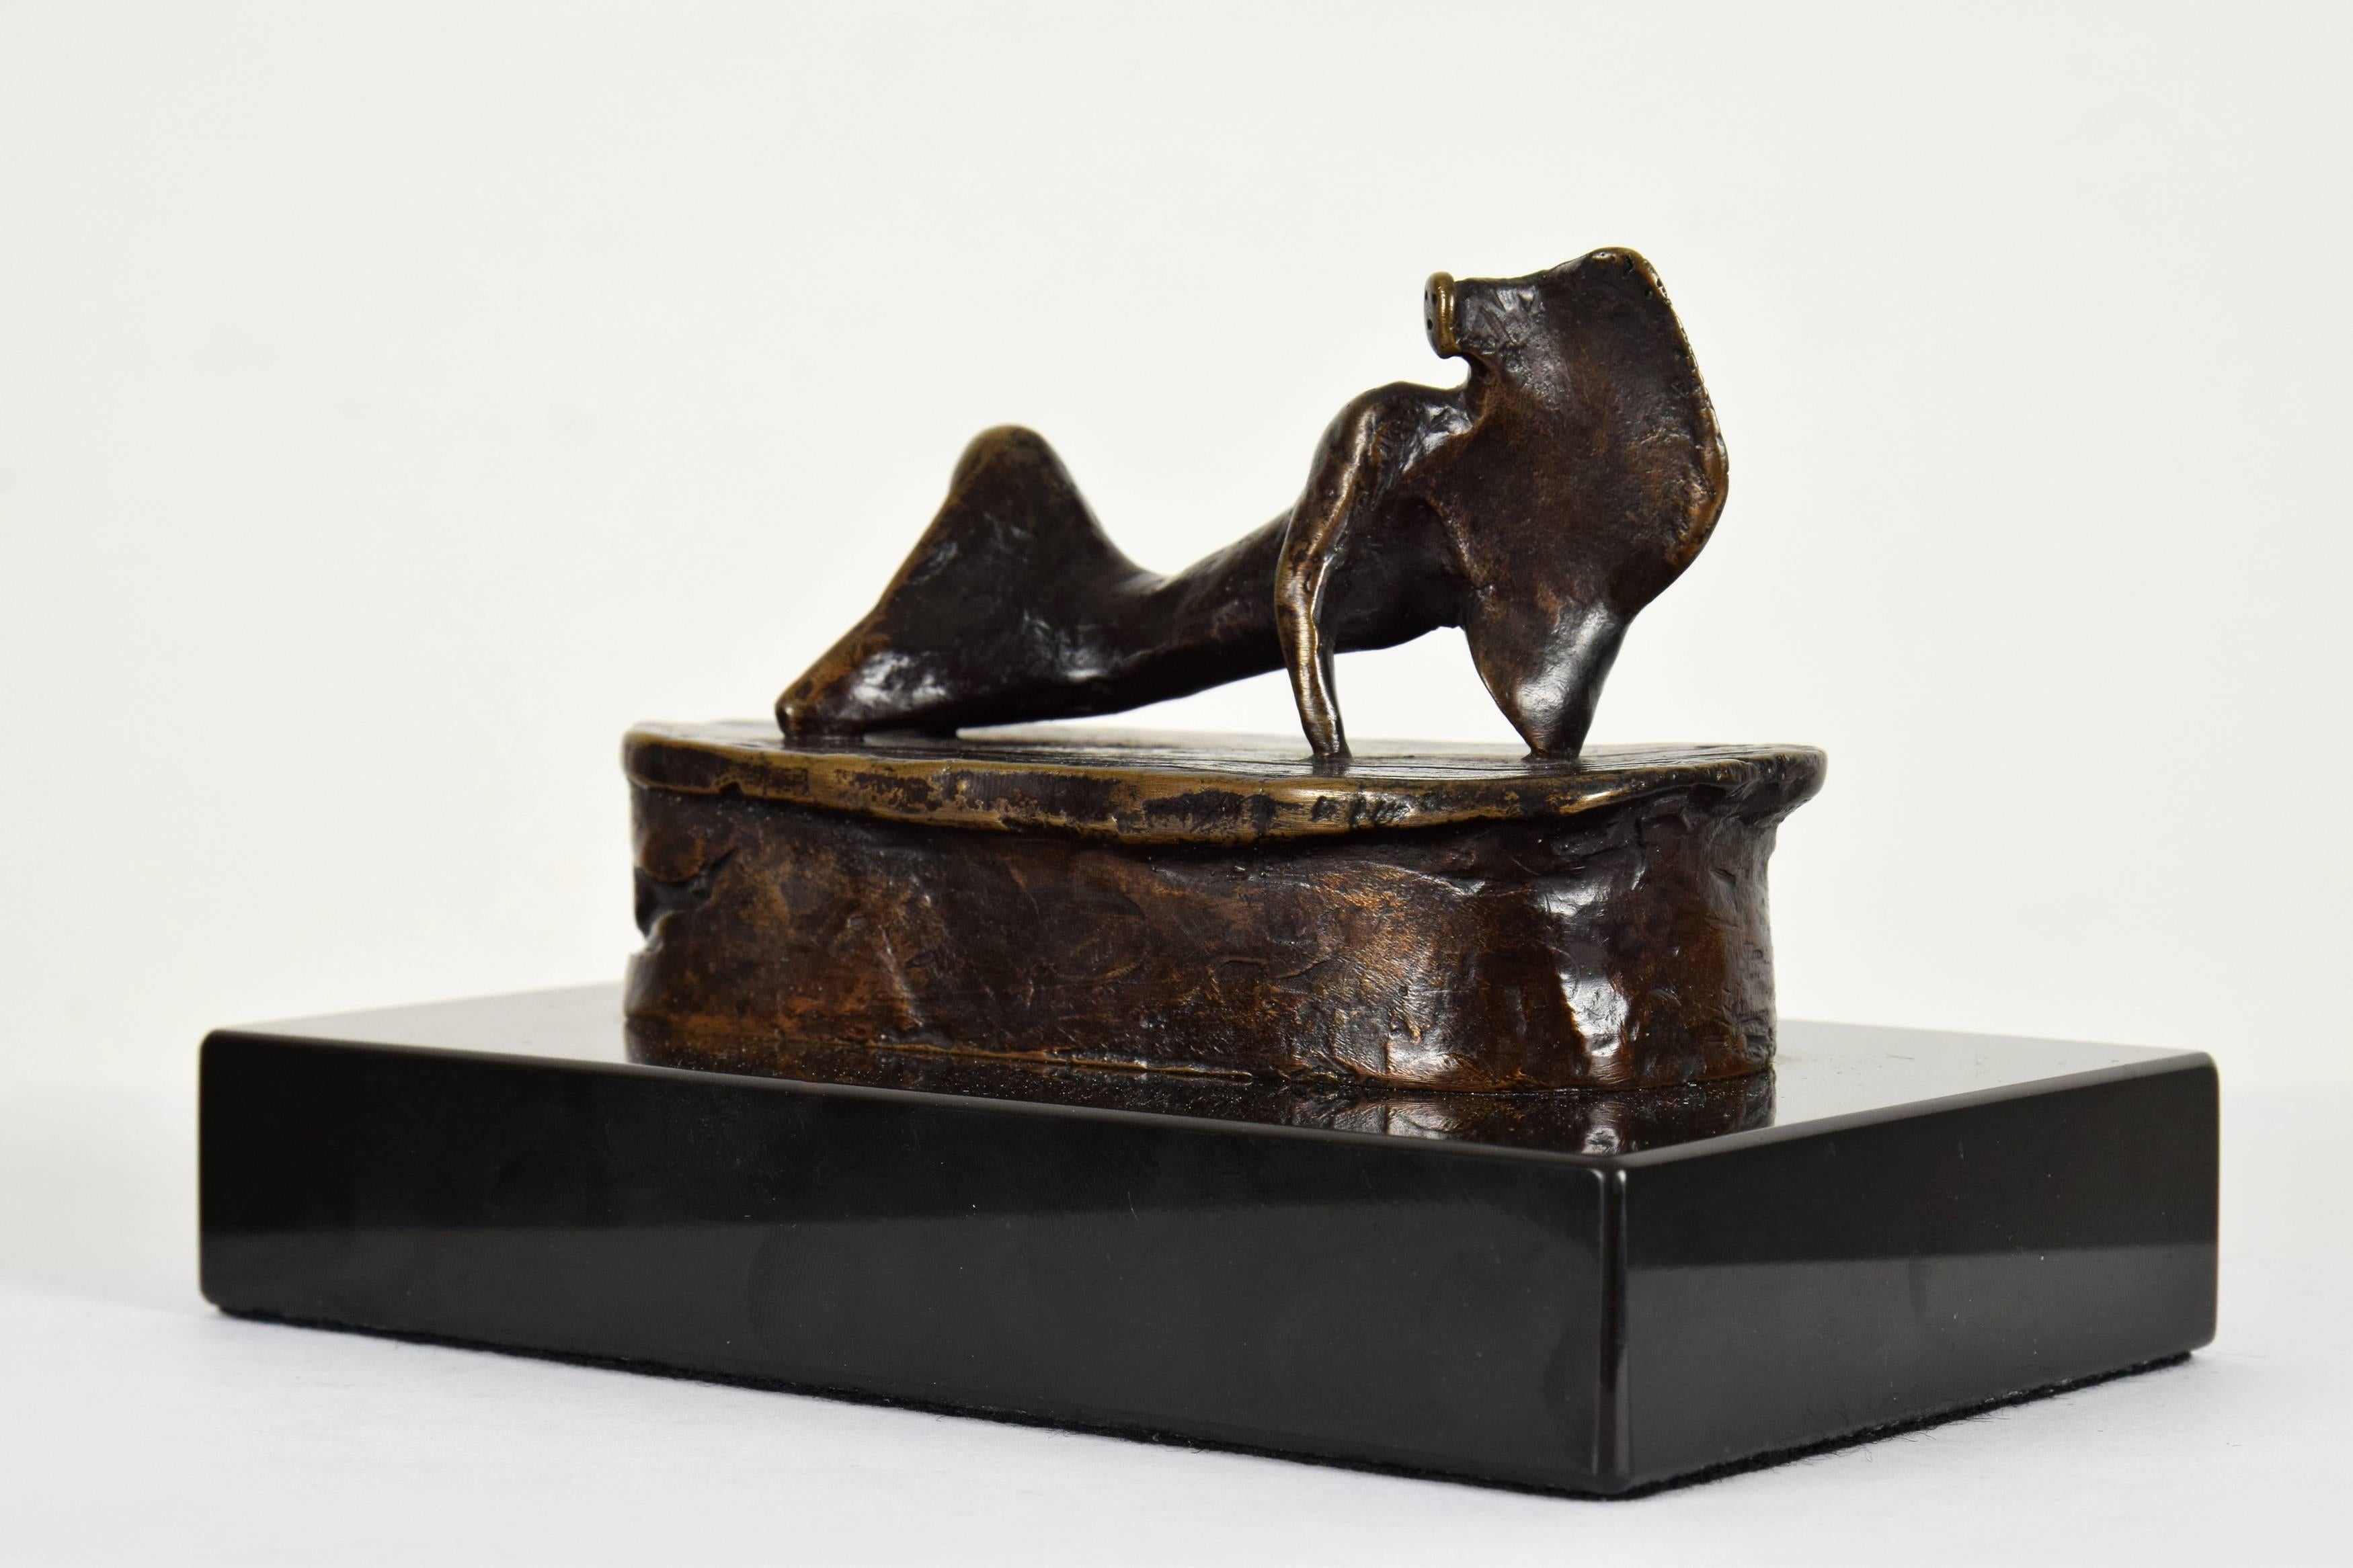 Maquette for Reclining Figure: Cloak - Modern Sculpture by Henry Moore